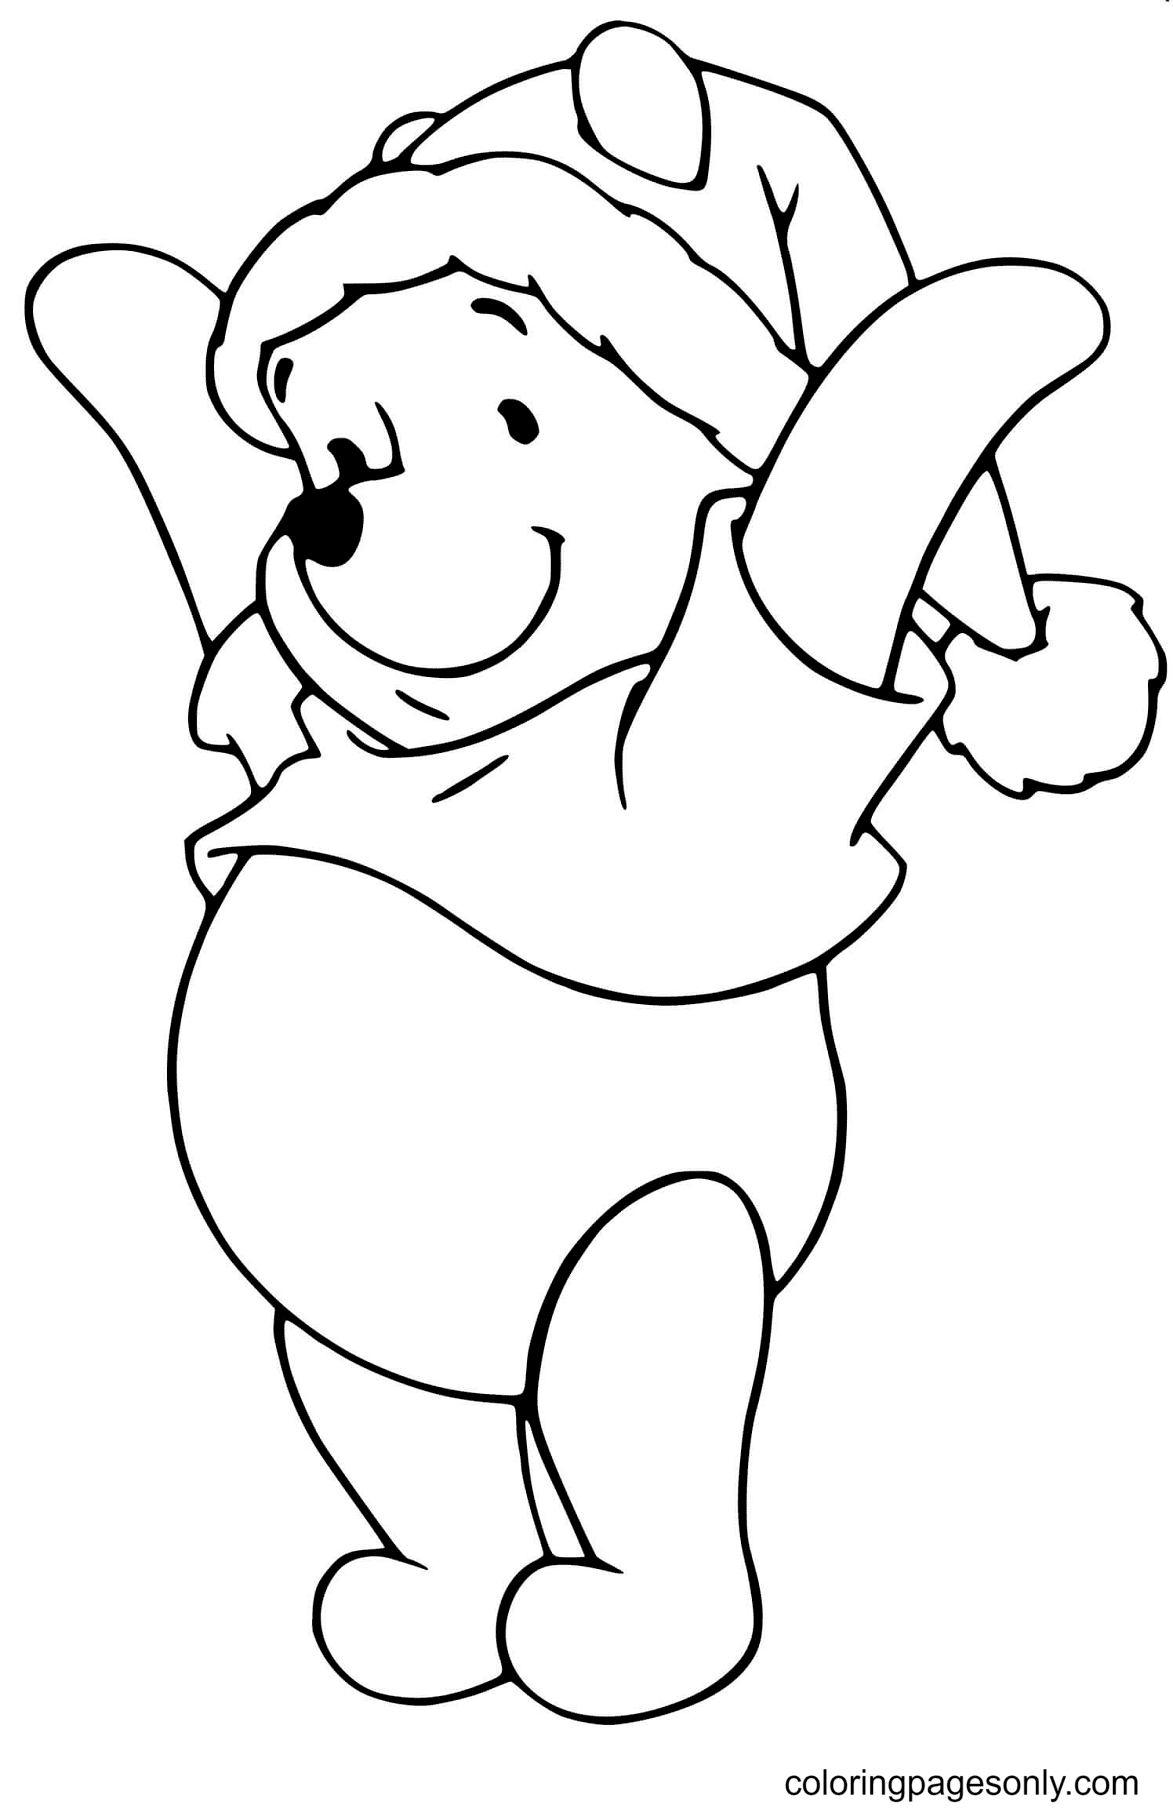 Winnie the Pooh as Santa Claus Coloring Page